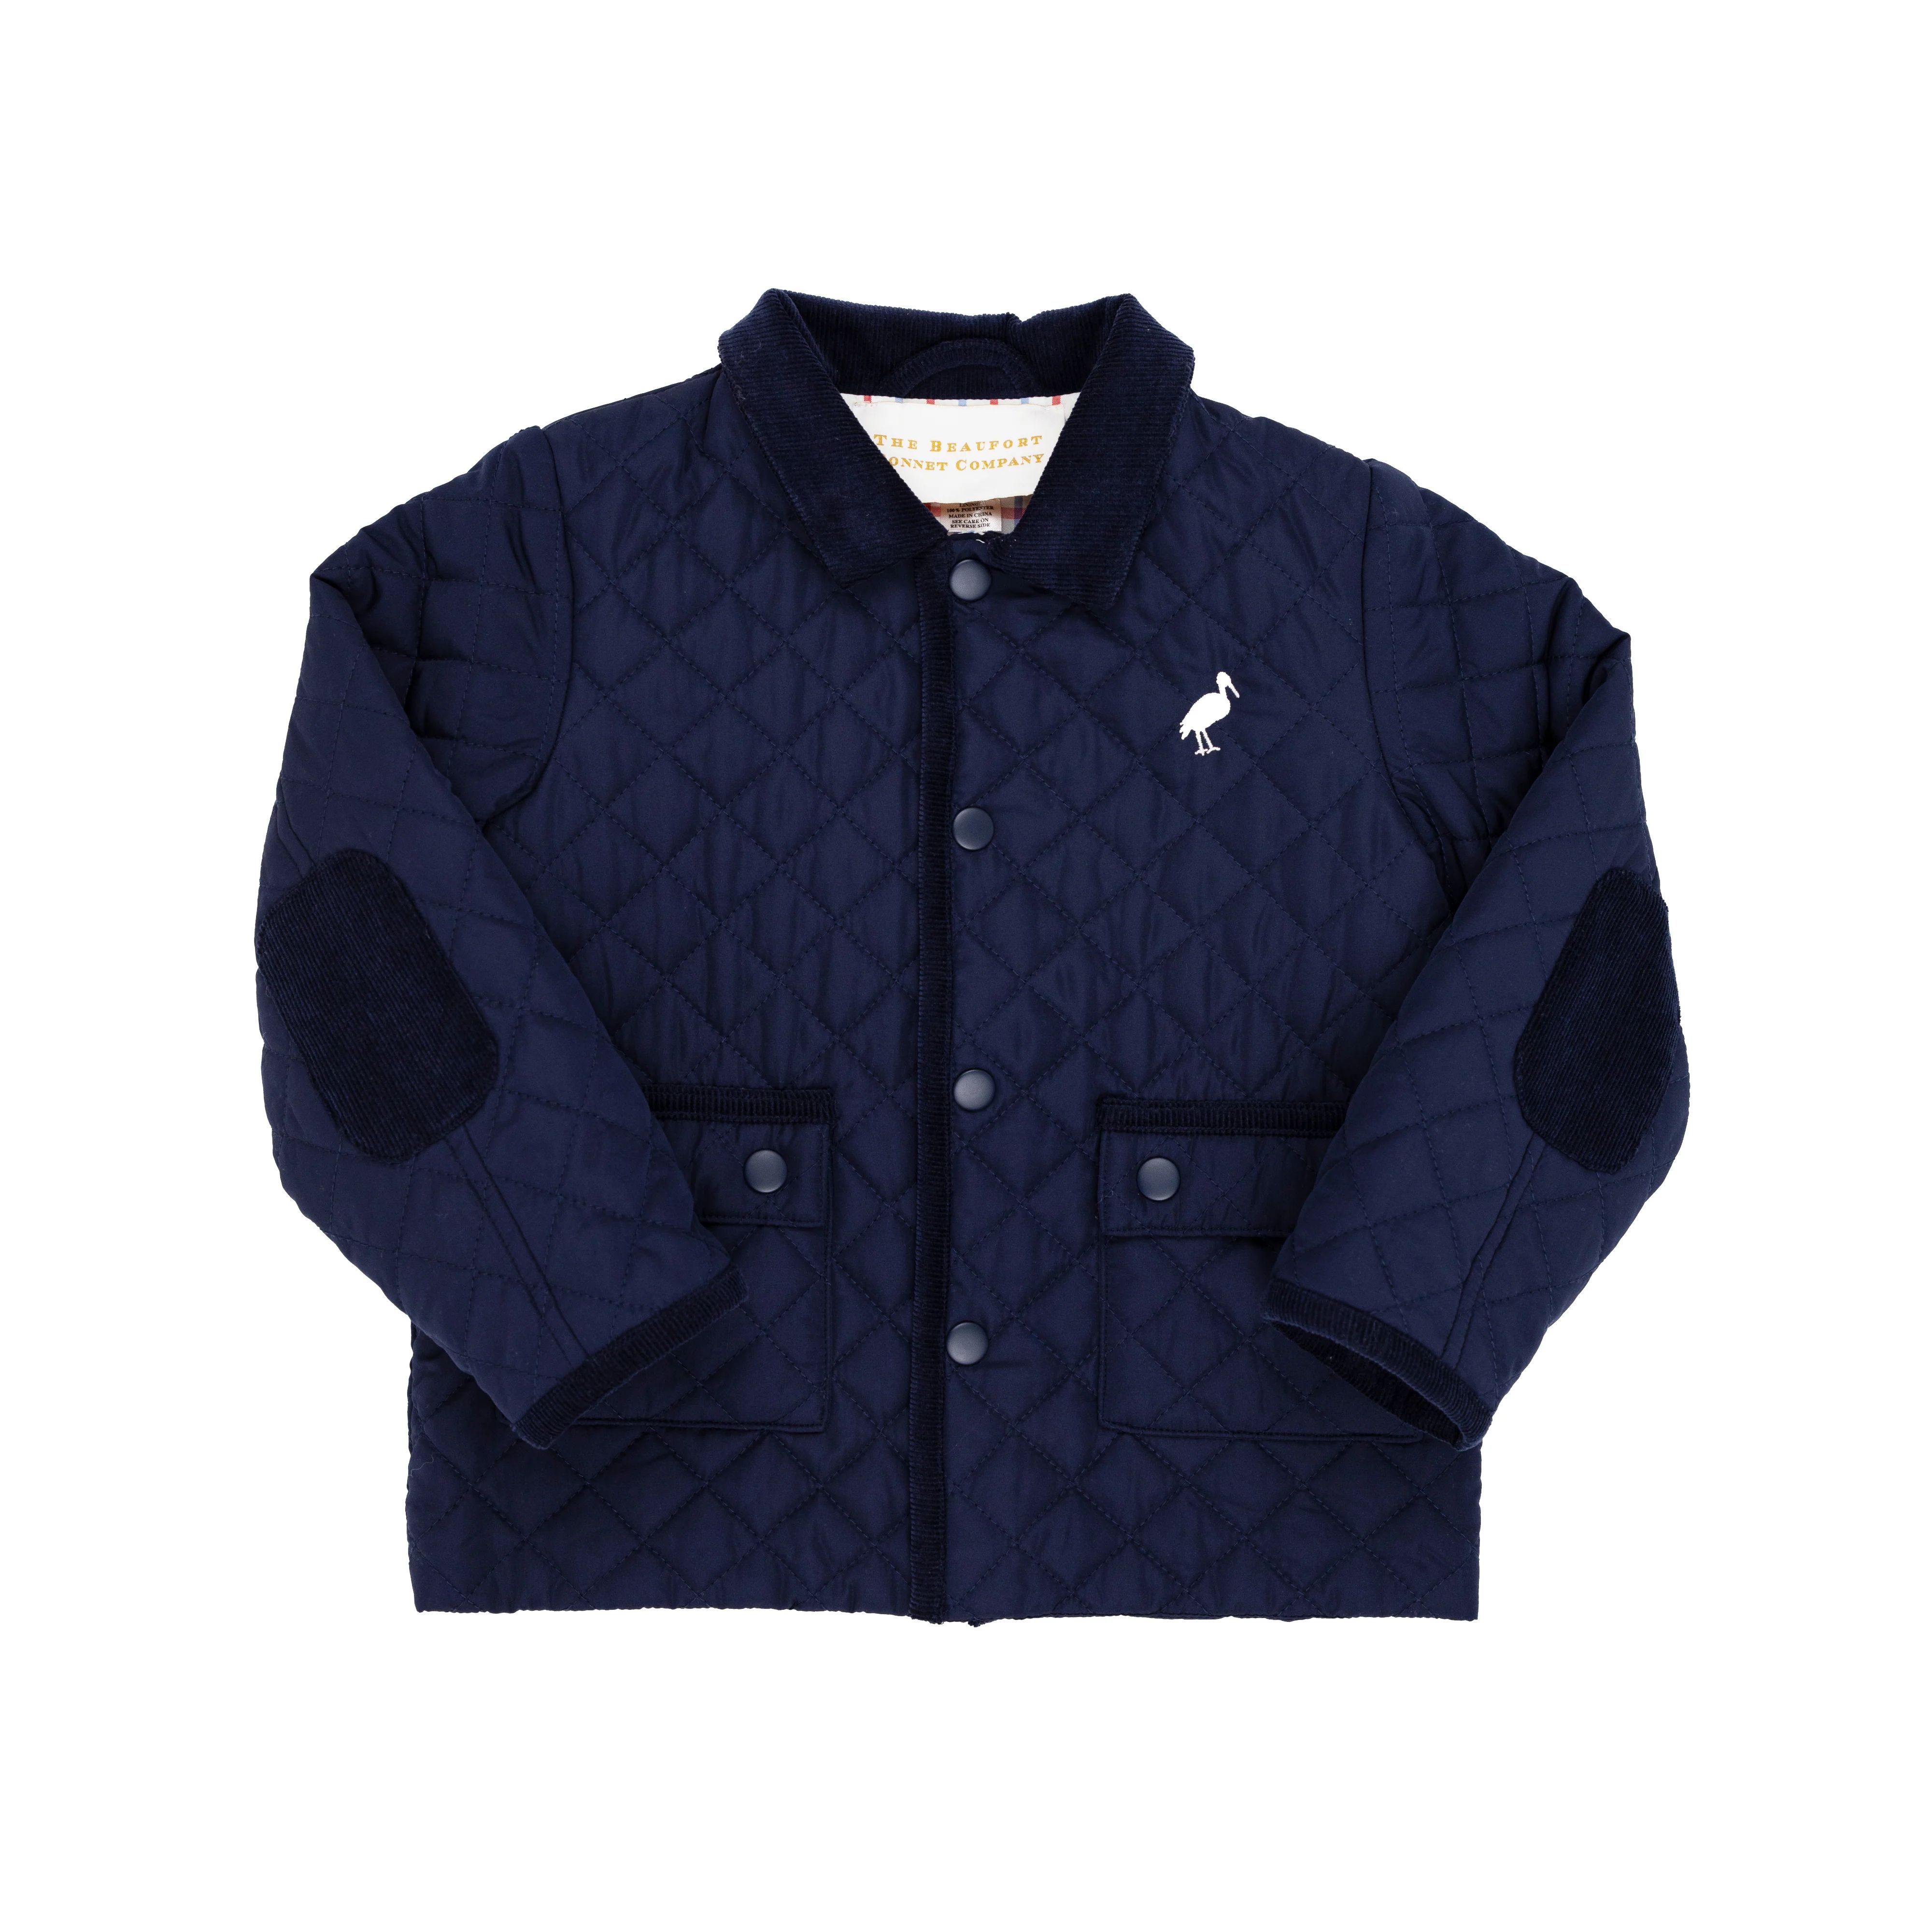 Caldwell Quilted Coat - Nantucket Navy with Palmetto Pearl Stork | The Beaufort Bonnet Company